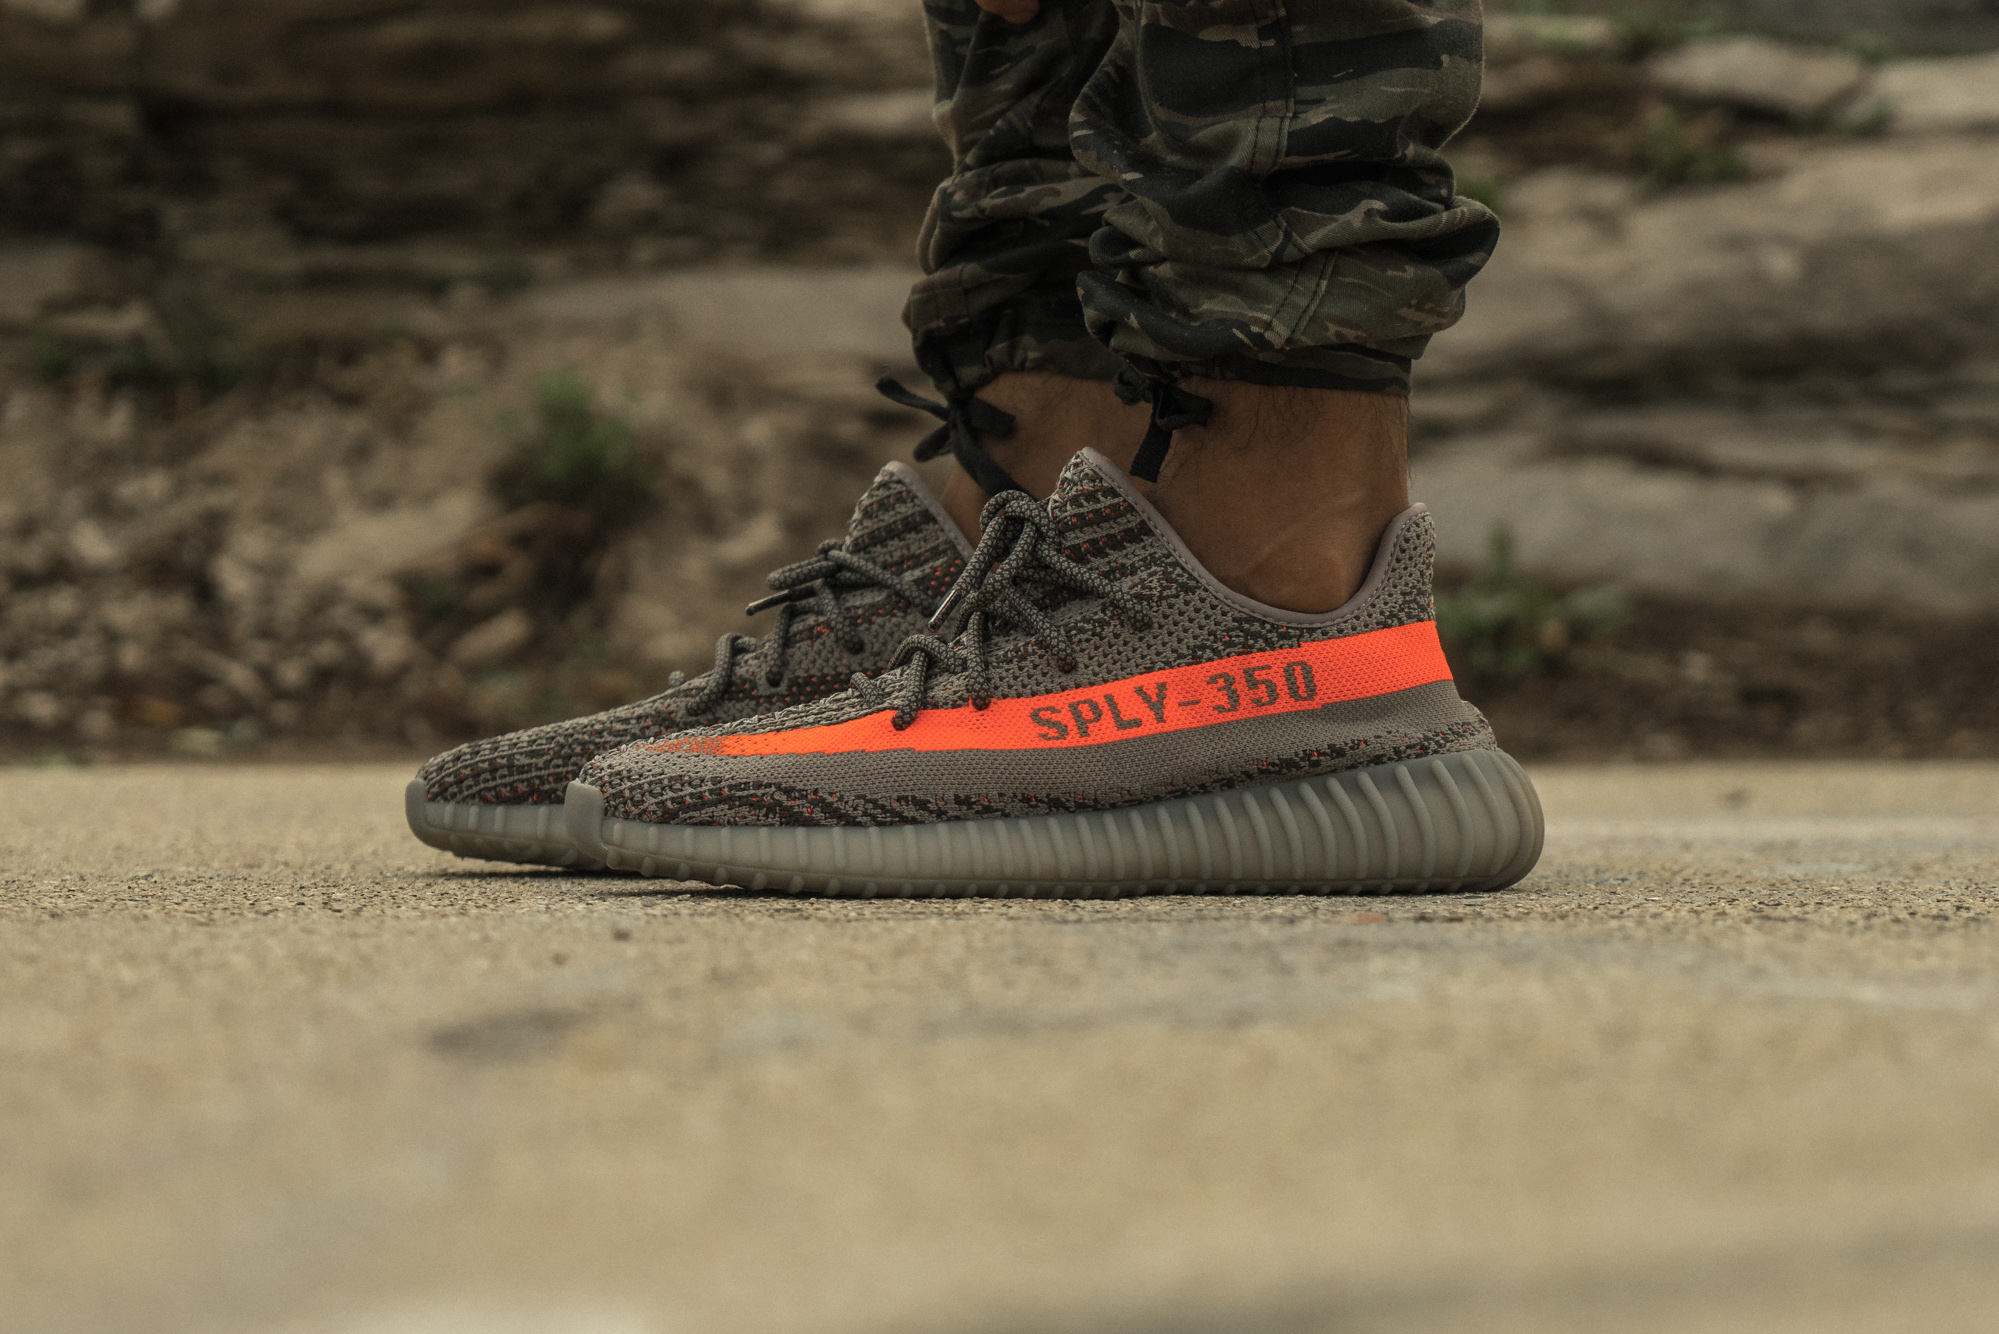 59% Off Adidas yeezy boost 350 v2 'black red' cp9652 uk Turtle Dove 